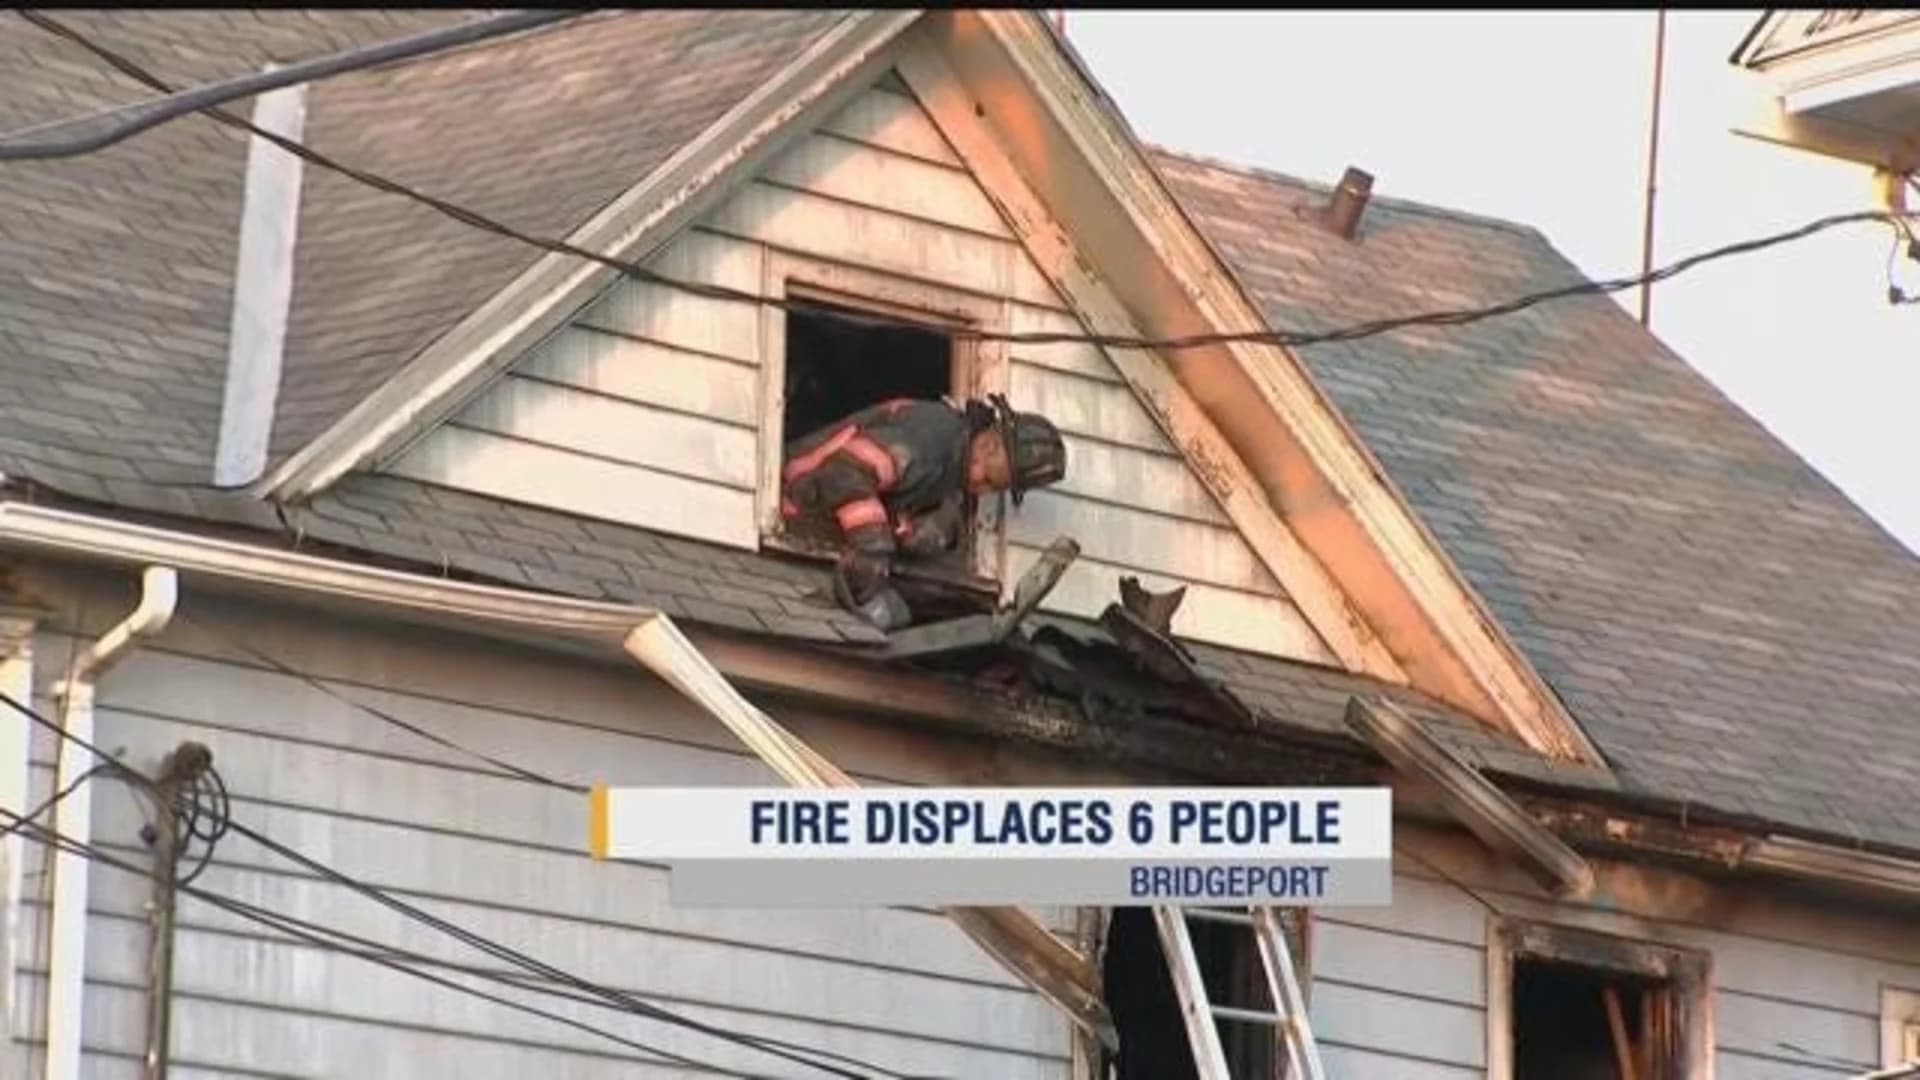 Officials: 6 family members homeless after fire rips through home